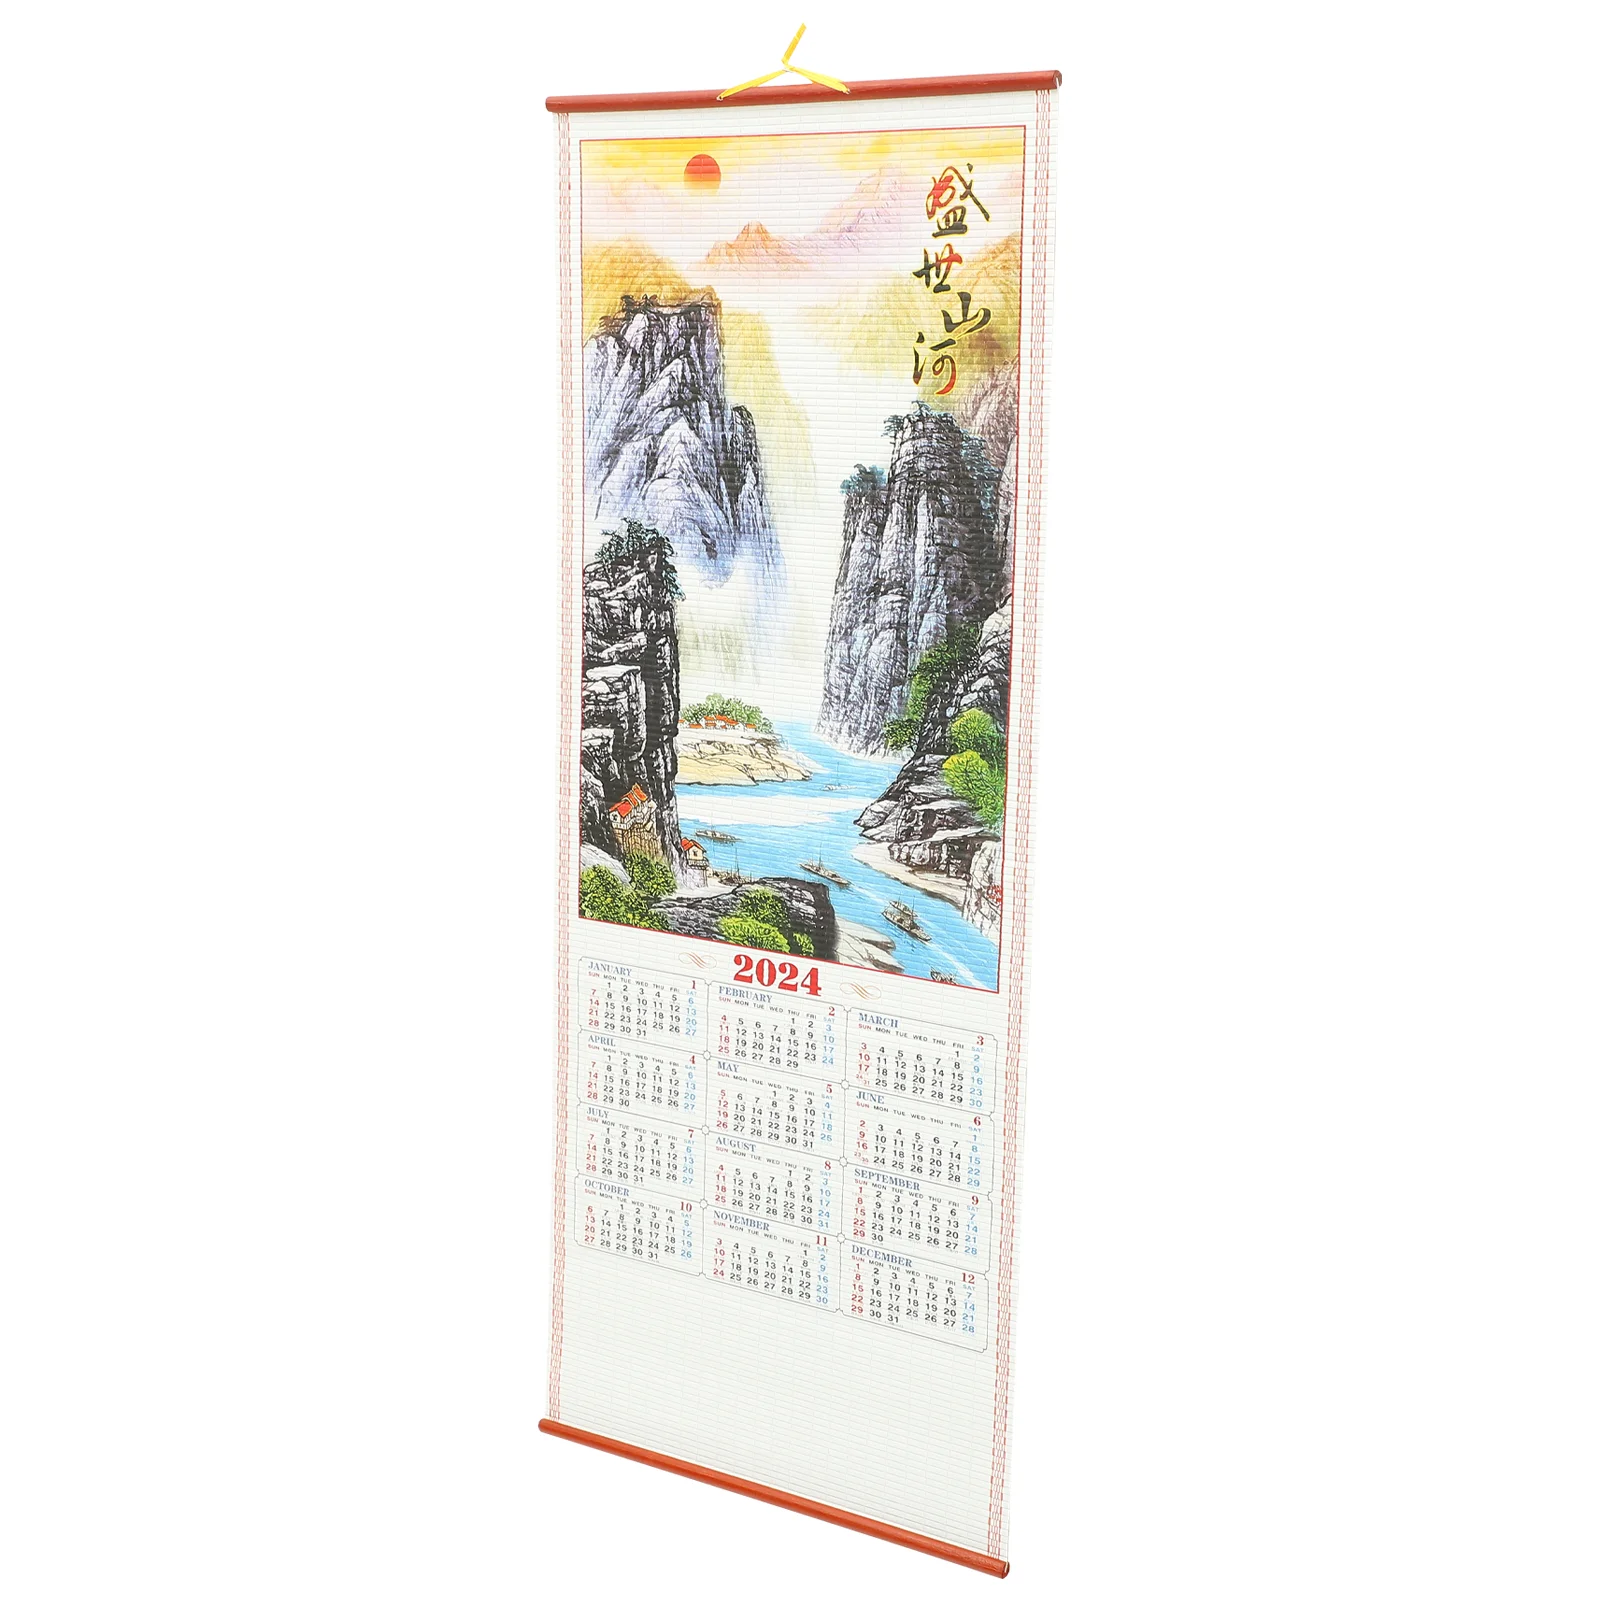 

Chinese Hanging Calendar The Year Dragon Hanging Chinese Style Decor Imitation Vine Scroll Dragon Year Landscape Decor